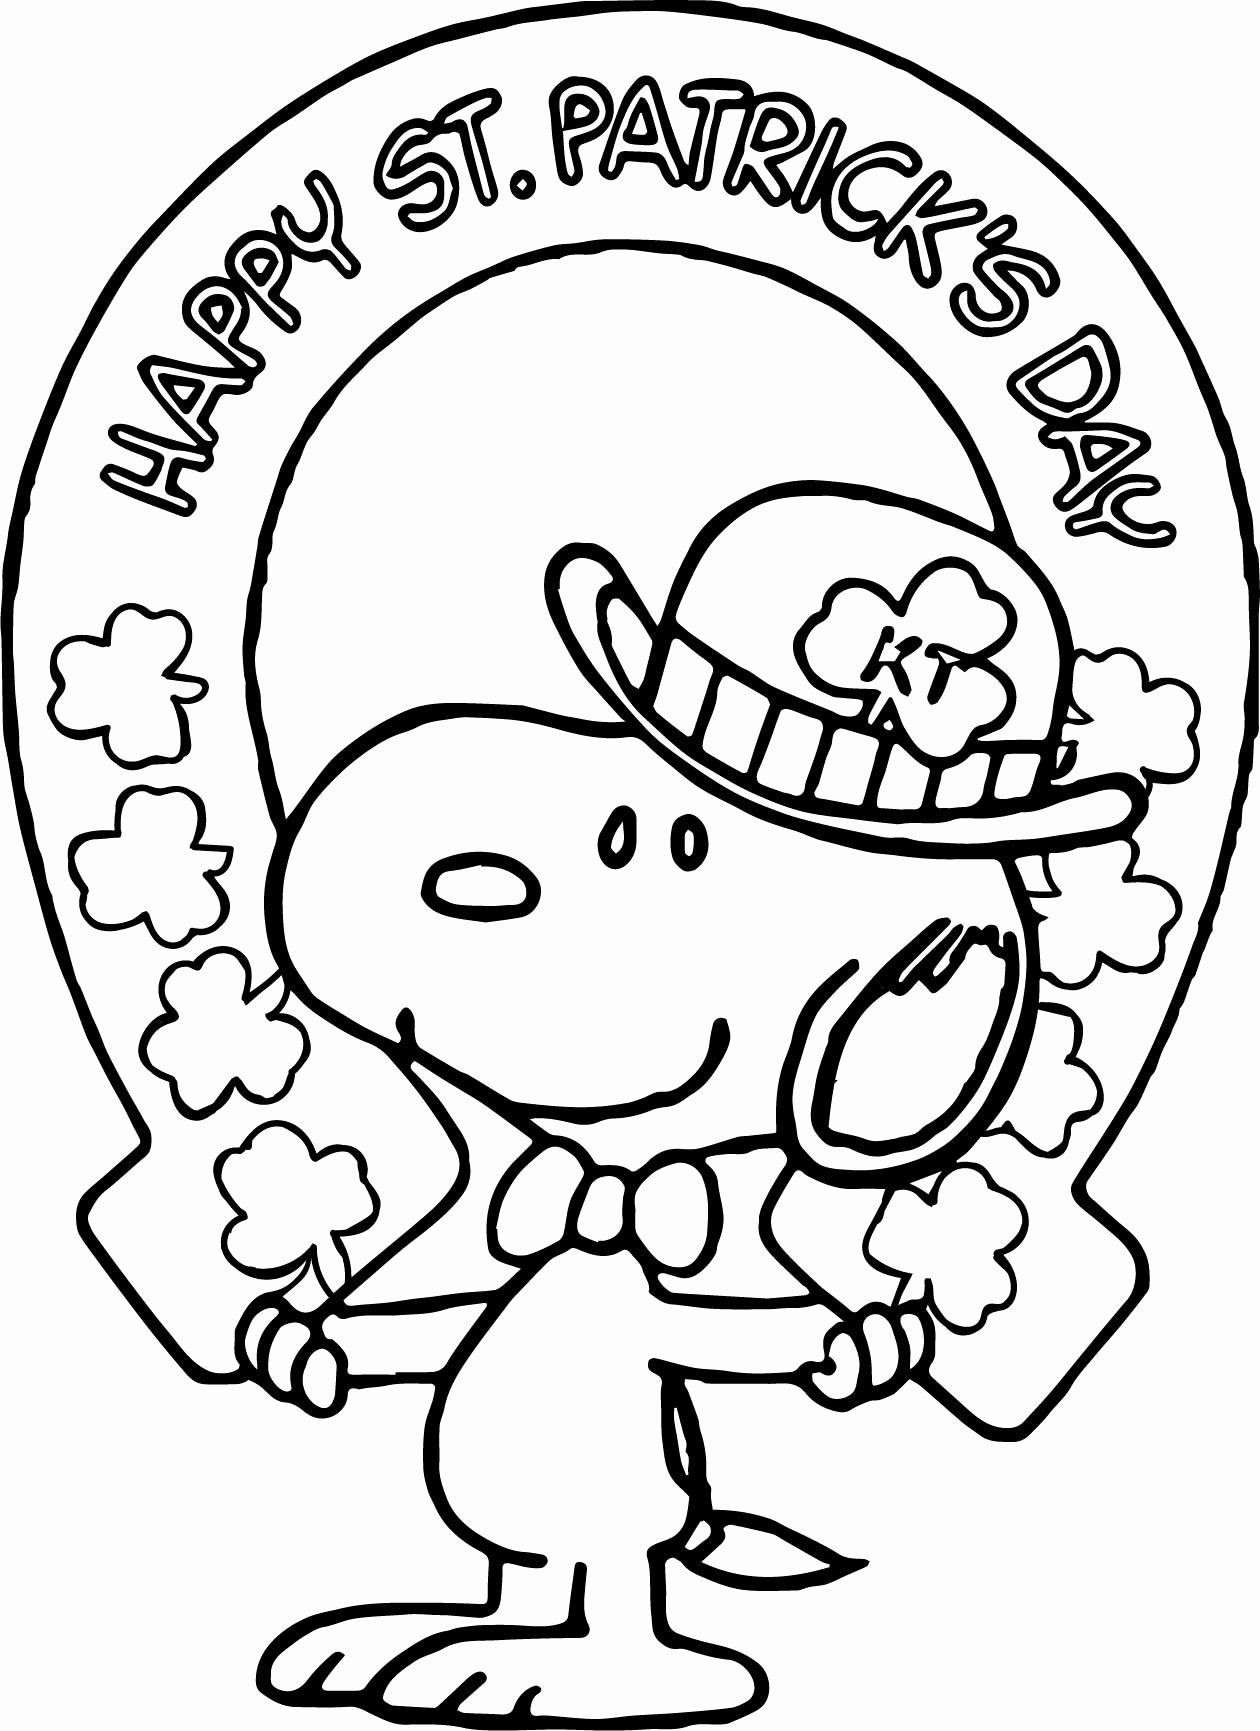 St Patrick'S Day Coloring Pages For Kids
 St Patrick Coloring Sheets in 2020